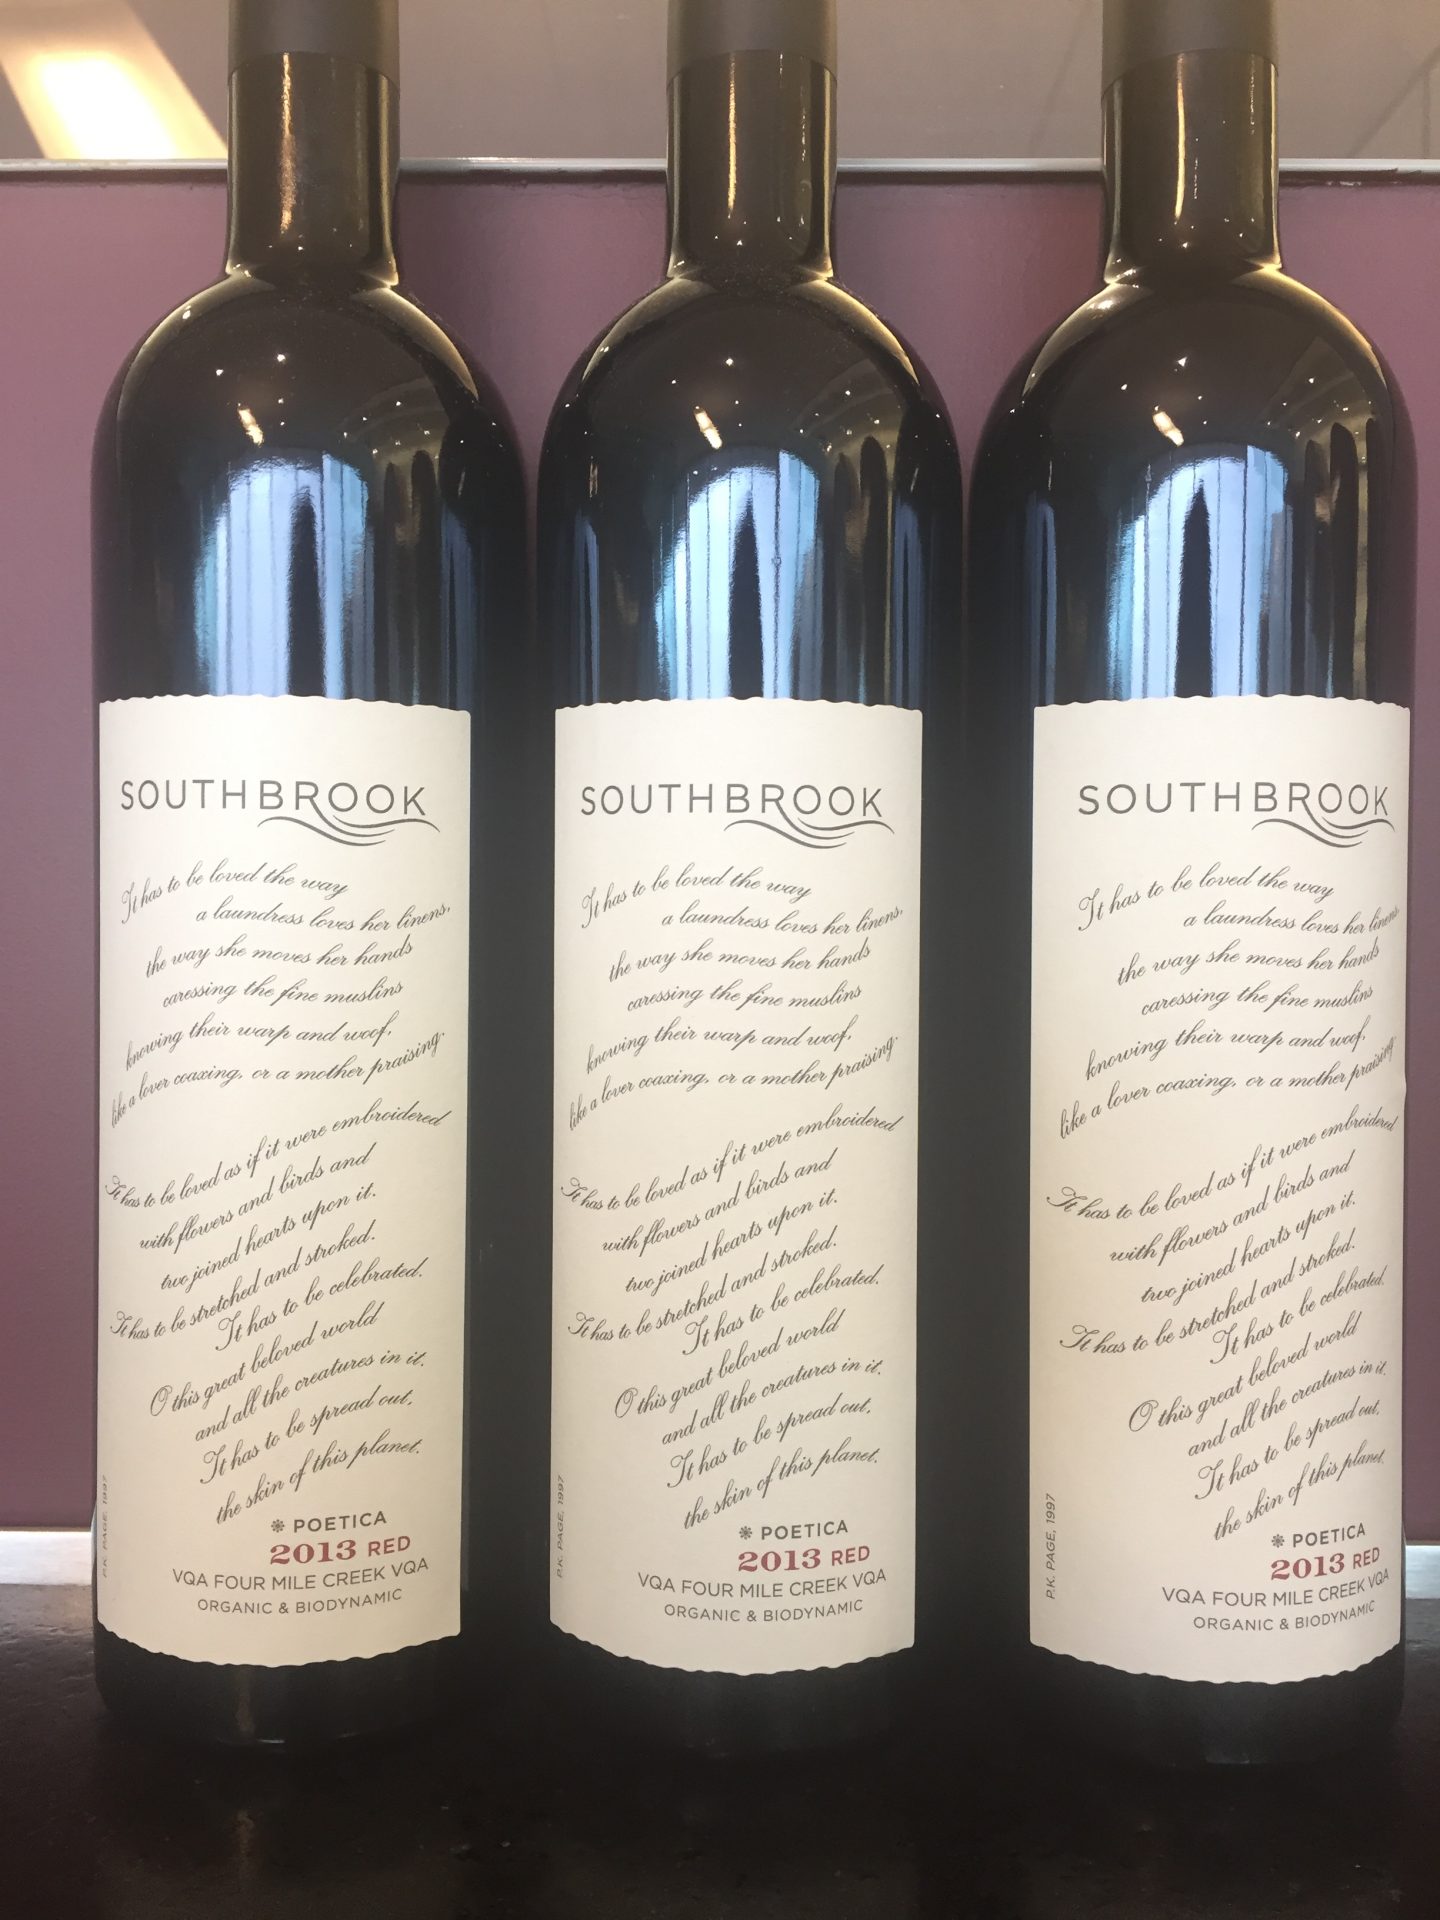 Southbrook Releases Icon Red Wine – 2013 Poetica Red